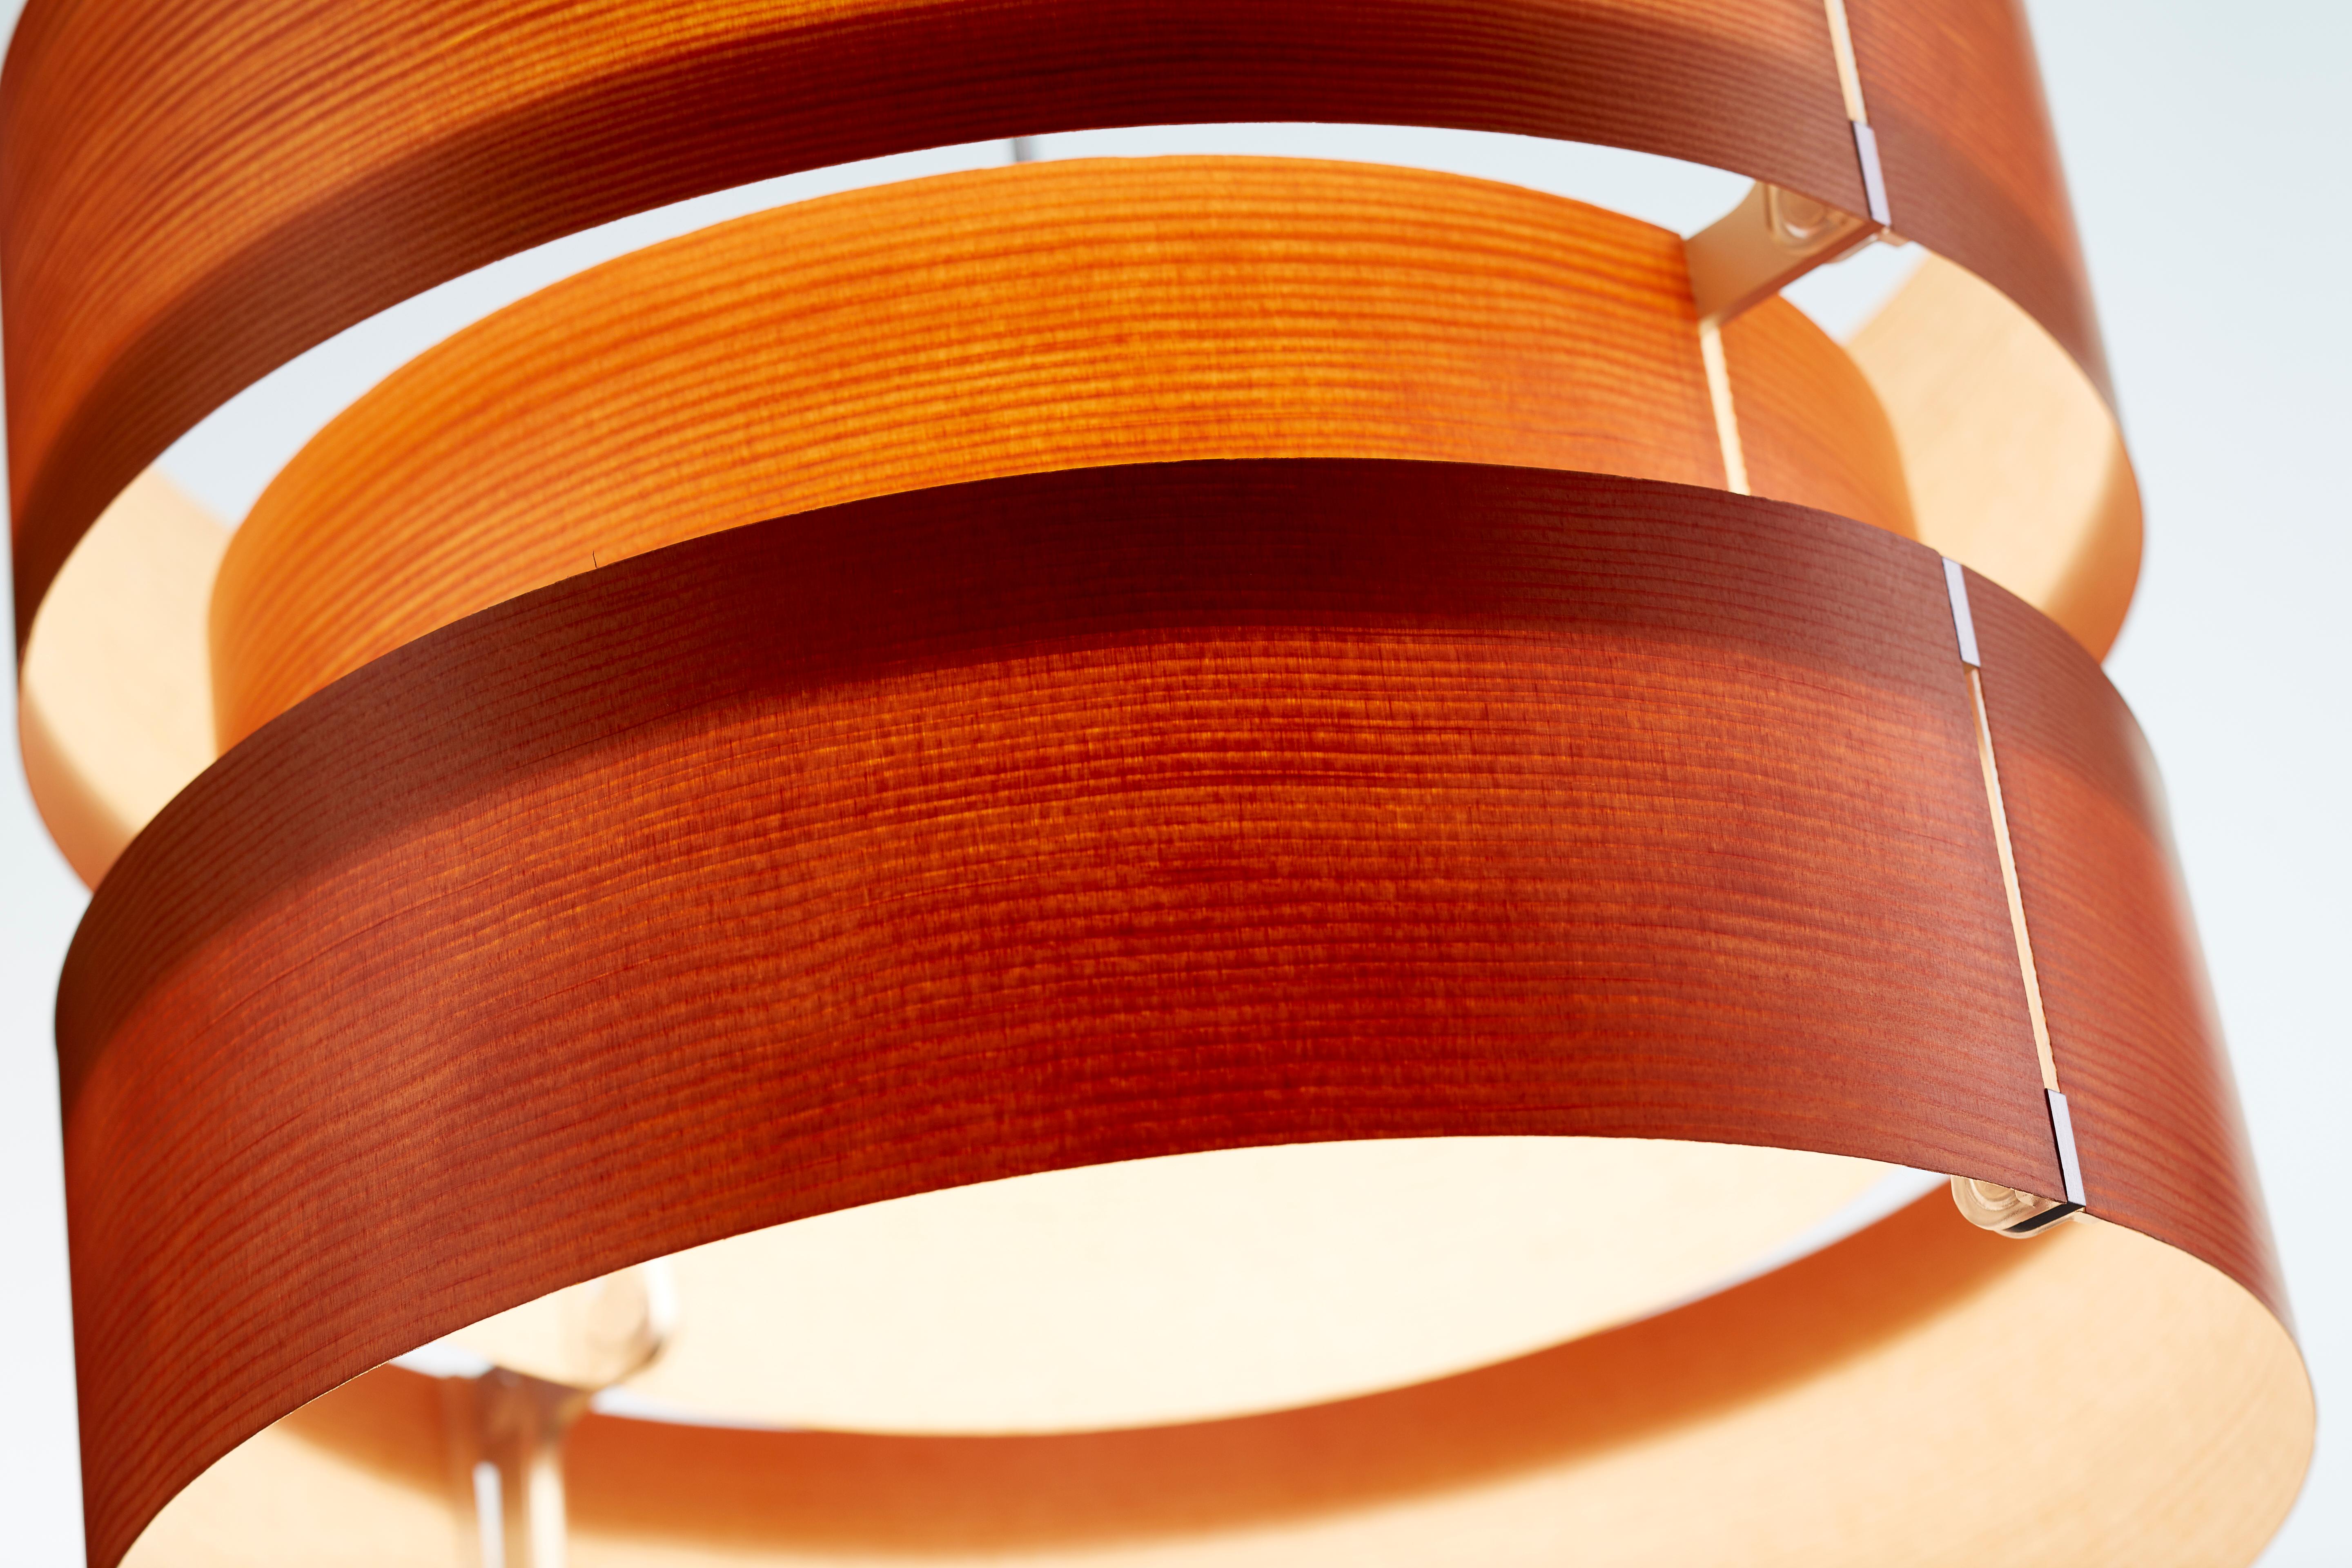 Large J.A. Coderch 'Cister Grande' Wood Suspension Lamp for Tunds In New Condition For Sale In Glendale, CA